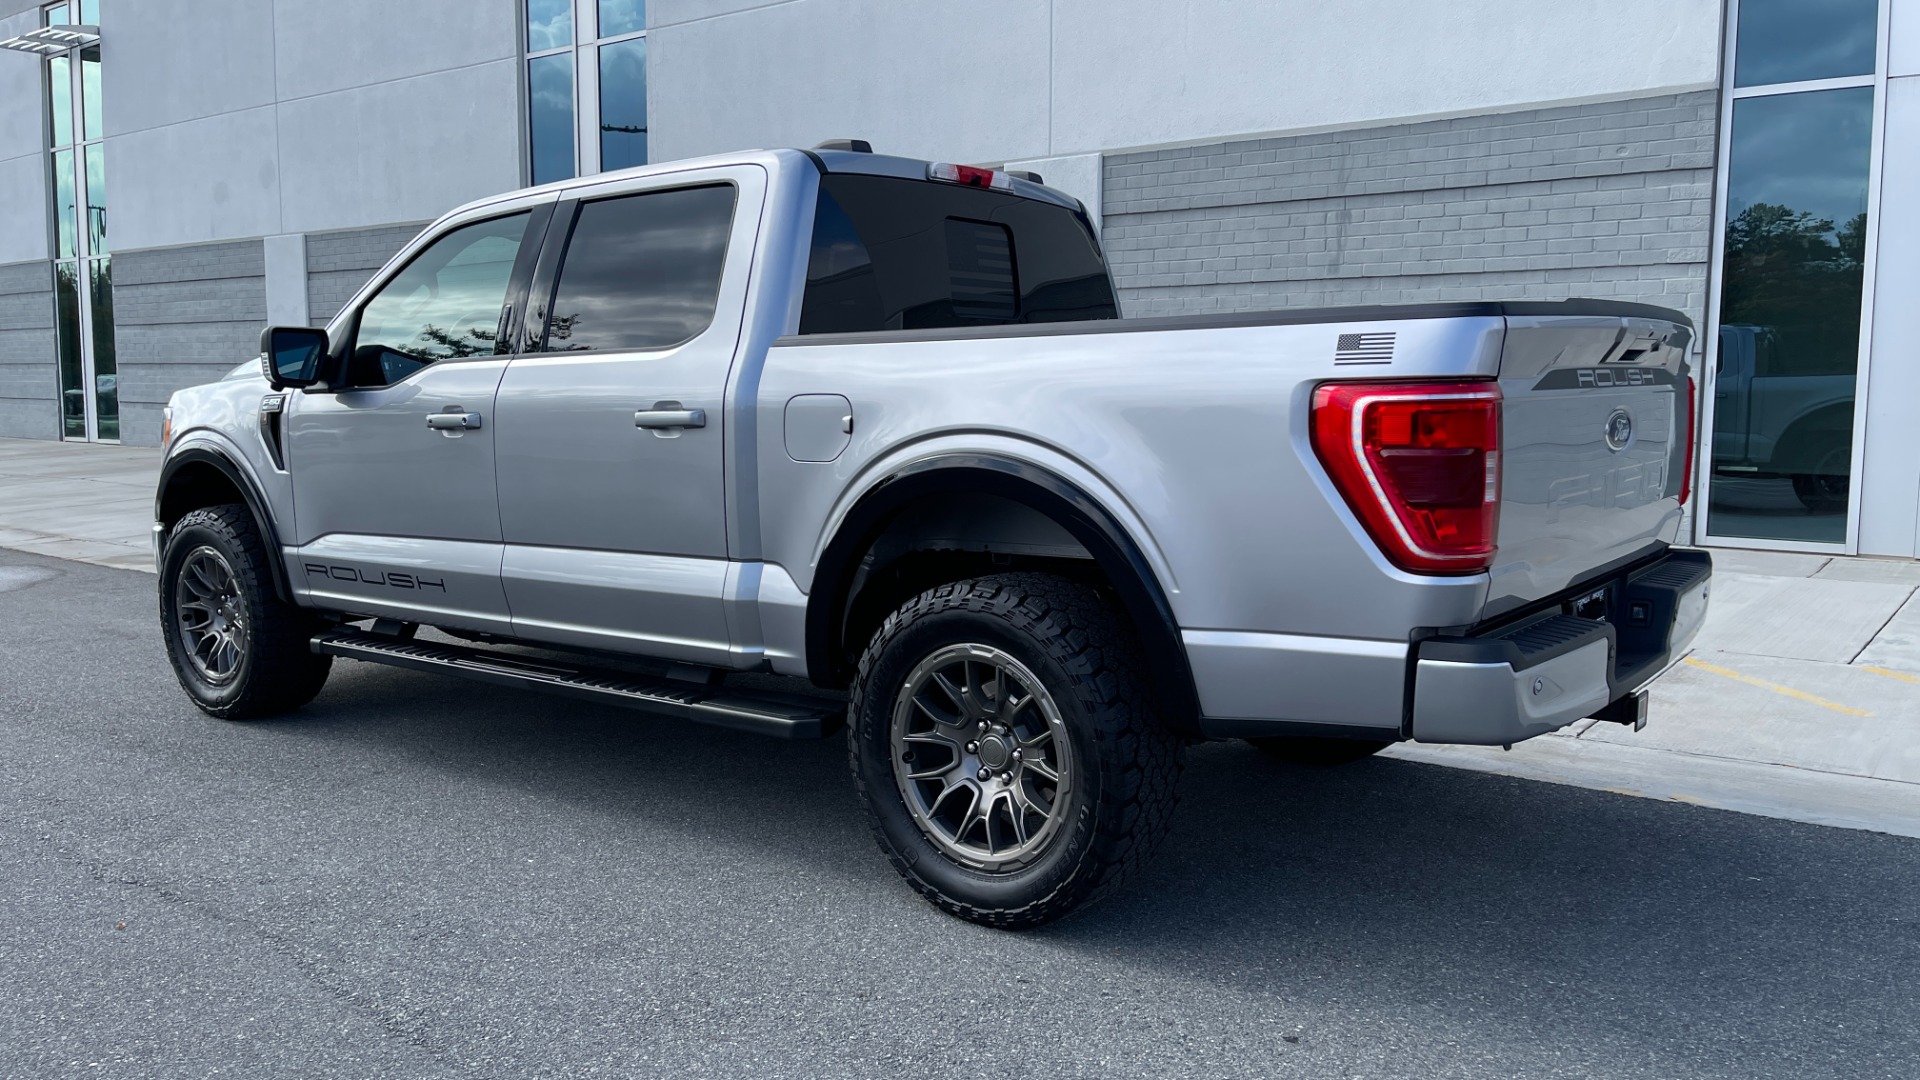 Used 2021 Ford F-150 ROUSH / 5.0 V8 / LEATHER / ACTIVE EXHAUST / FOX SHOCKS / CONSOLE SAFE for sale $69,985 at Formula Imports in Charlotte NC 28227 4